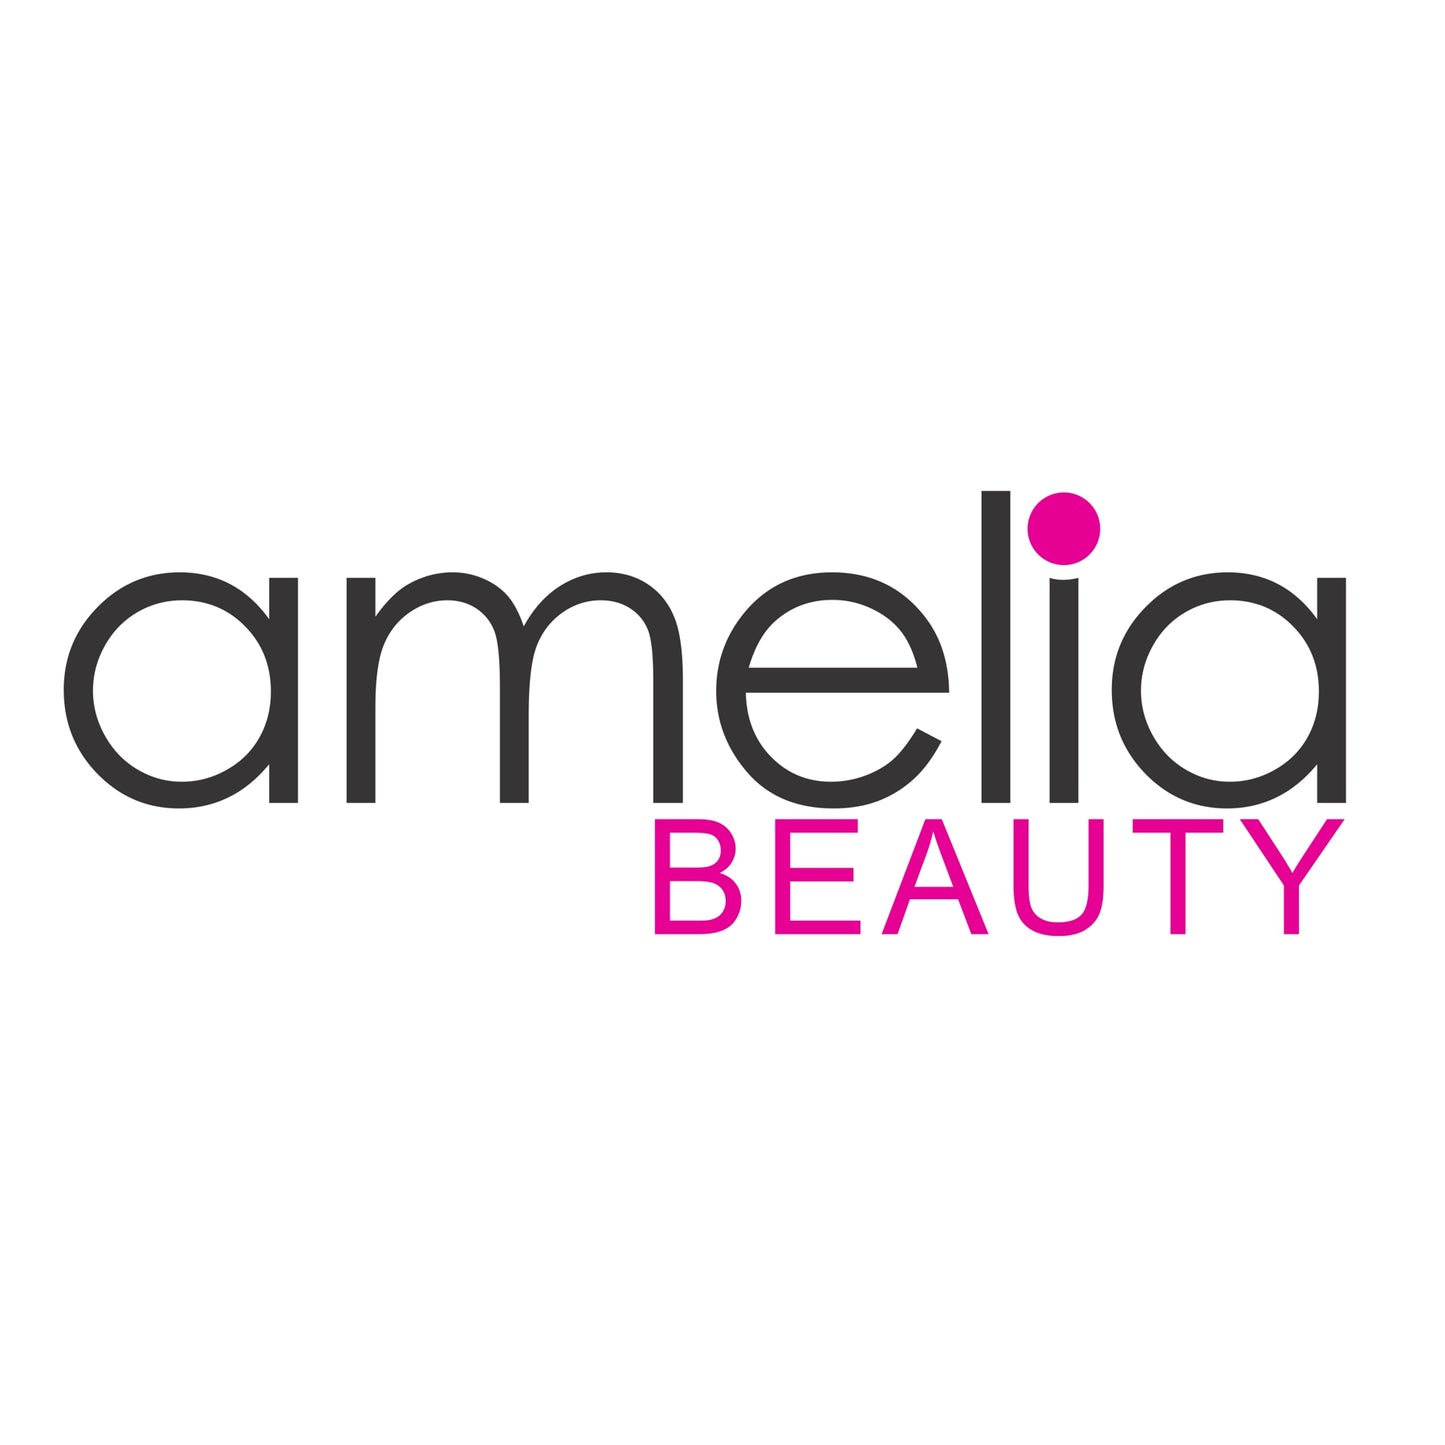 Amelia Beauty Cellulose Acetate 7in Styling Comb, Handmade, Smooth Edges, Eco-Friendly Plant Based Material, Fine and Course Teeth - Black Color